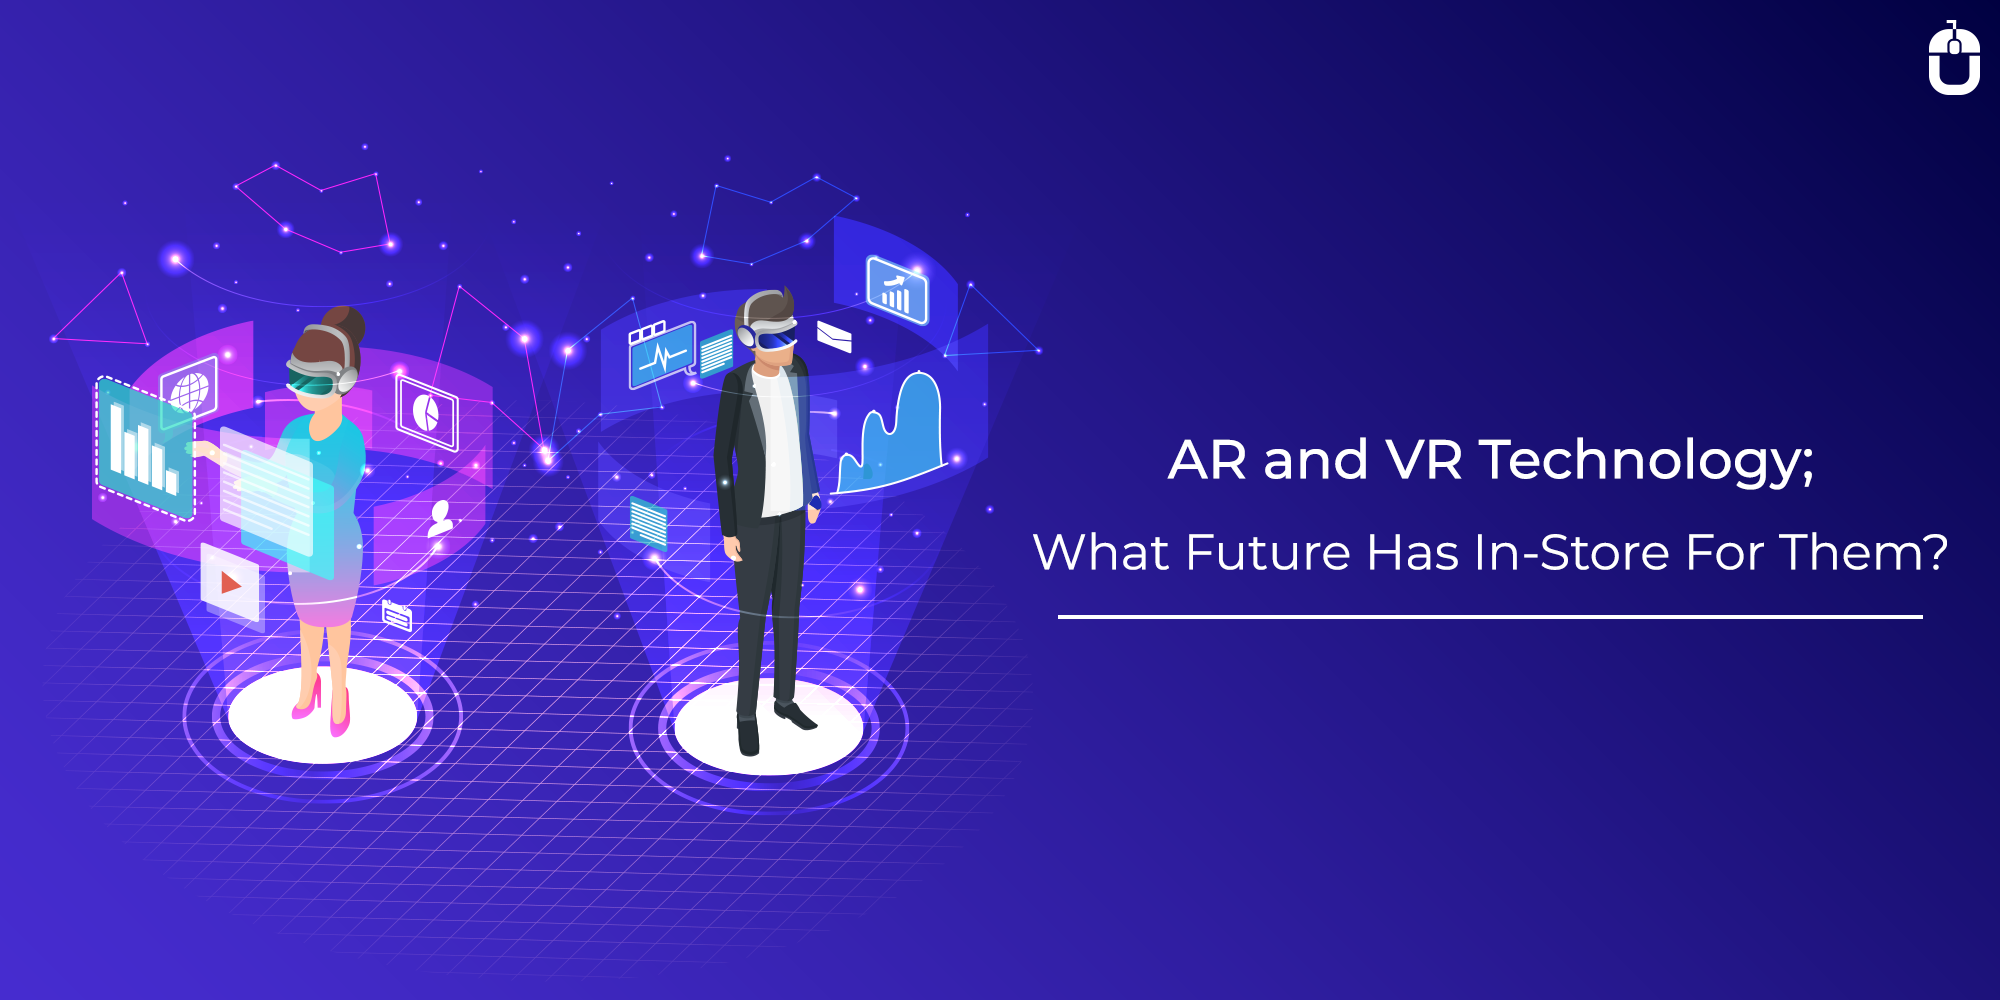 AR and VR Technology; What Future Has In-Store For Them?